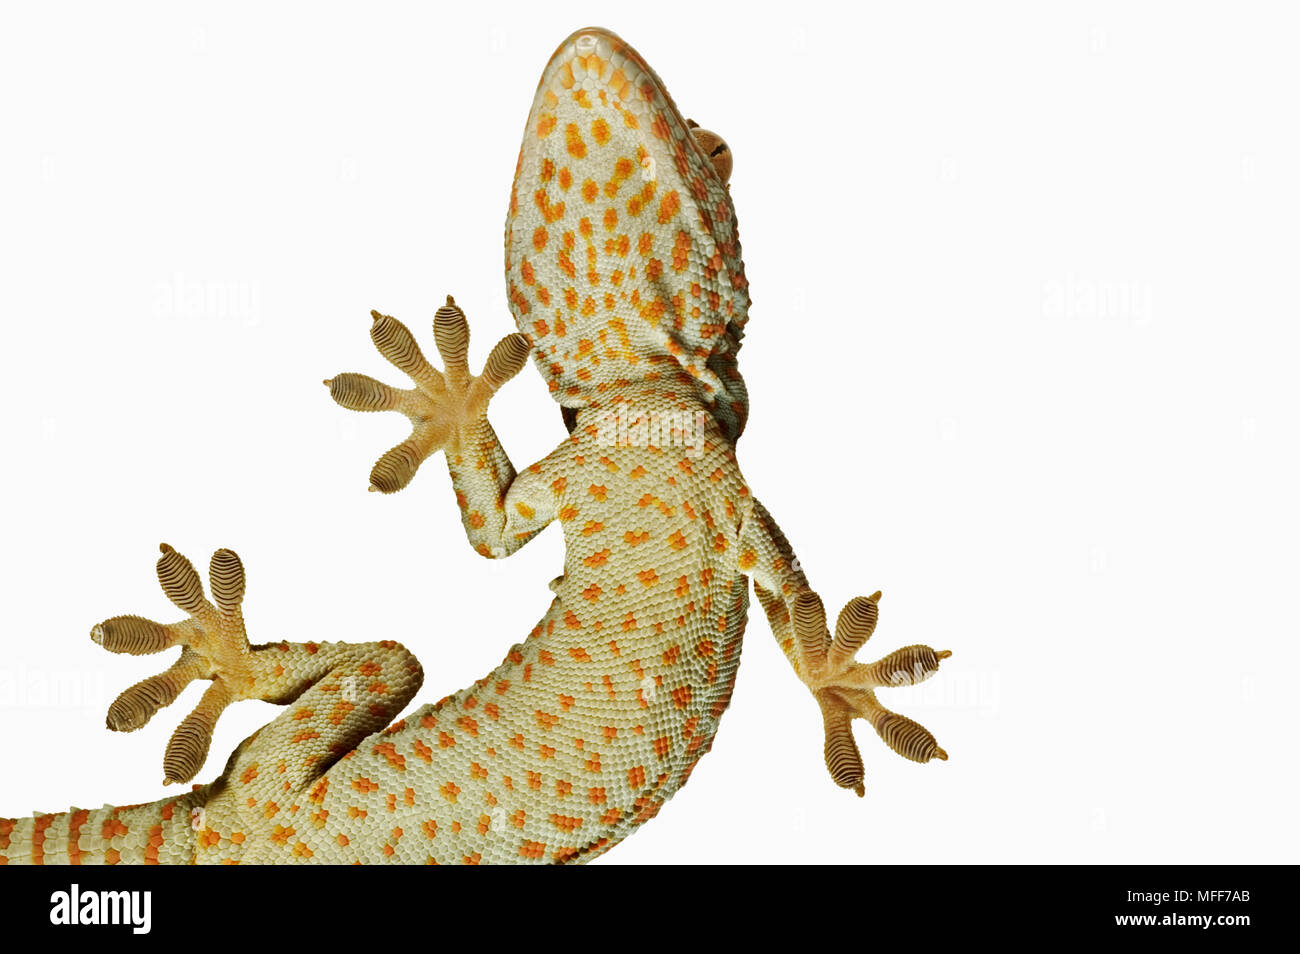 TOKAY GECKO Gekko gecko View from below showing specially adapted feet.  Distribution: South East Asia. Stock Photo